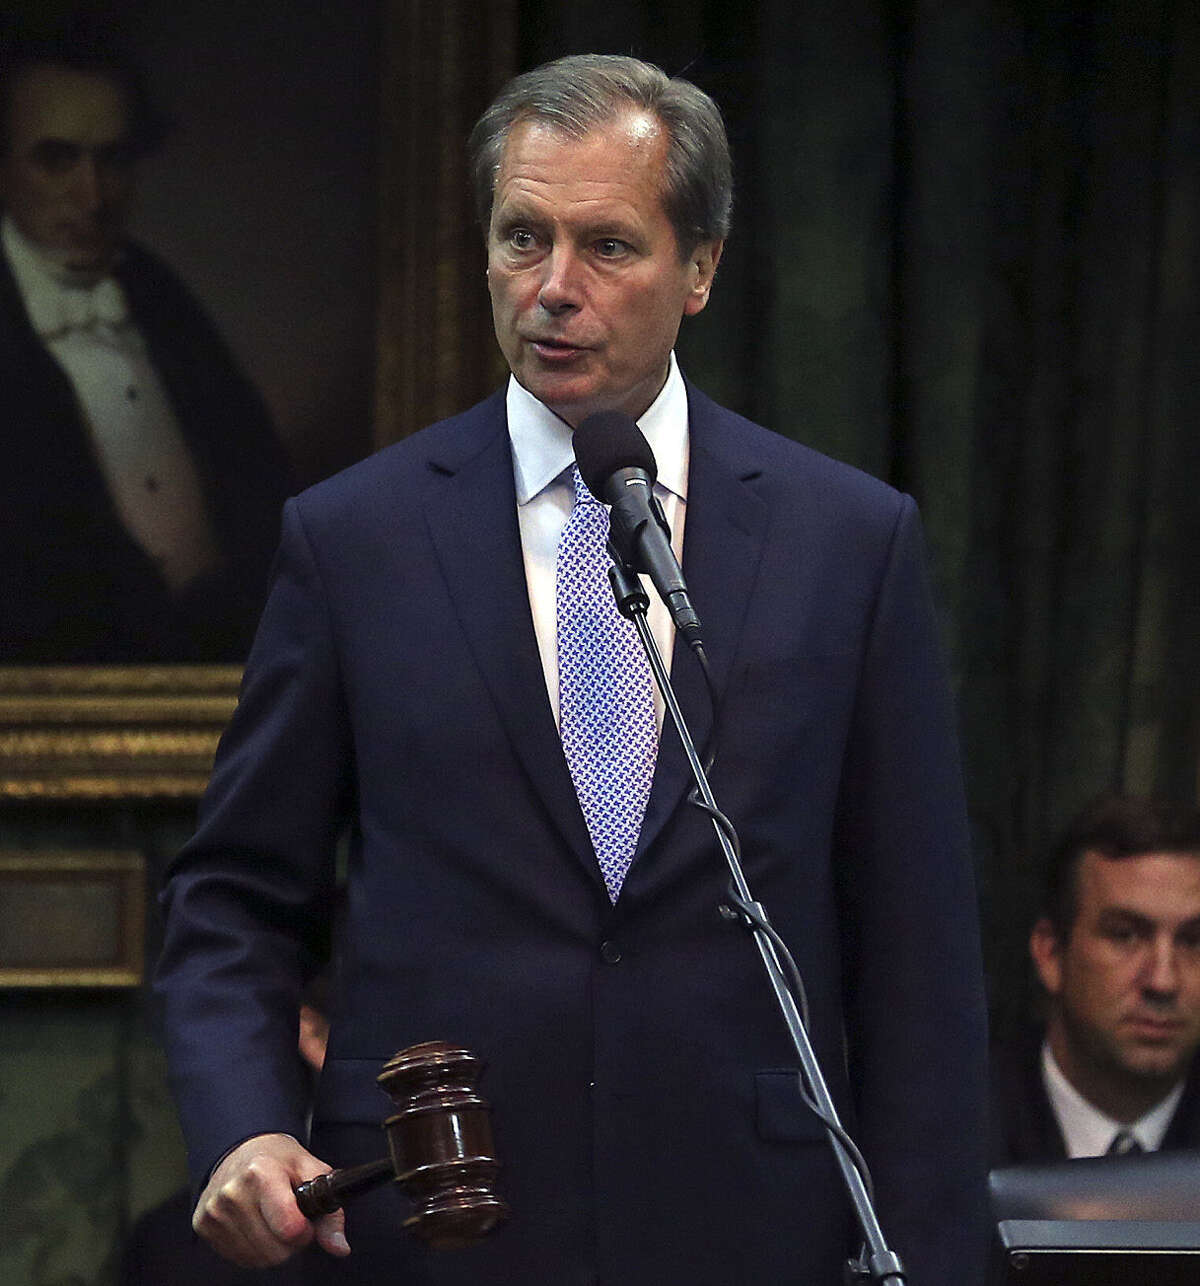 Lt. Gov. David Dewhurst says Patrick “showboats” and isn't able to work with others.